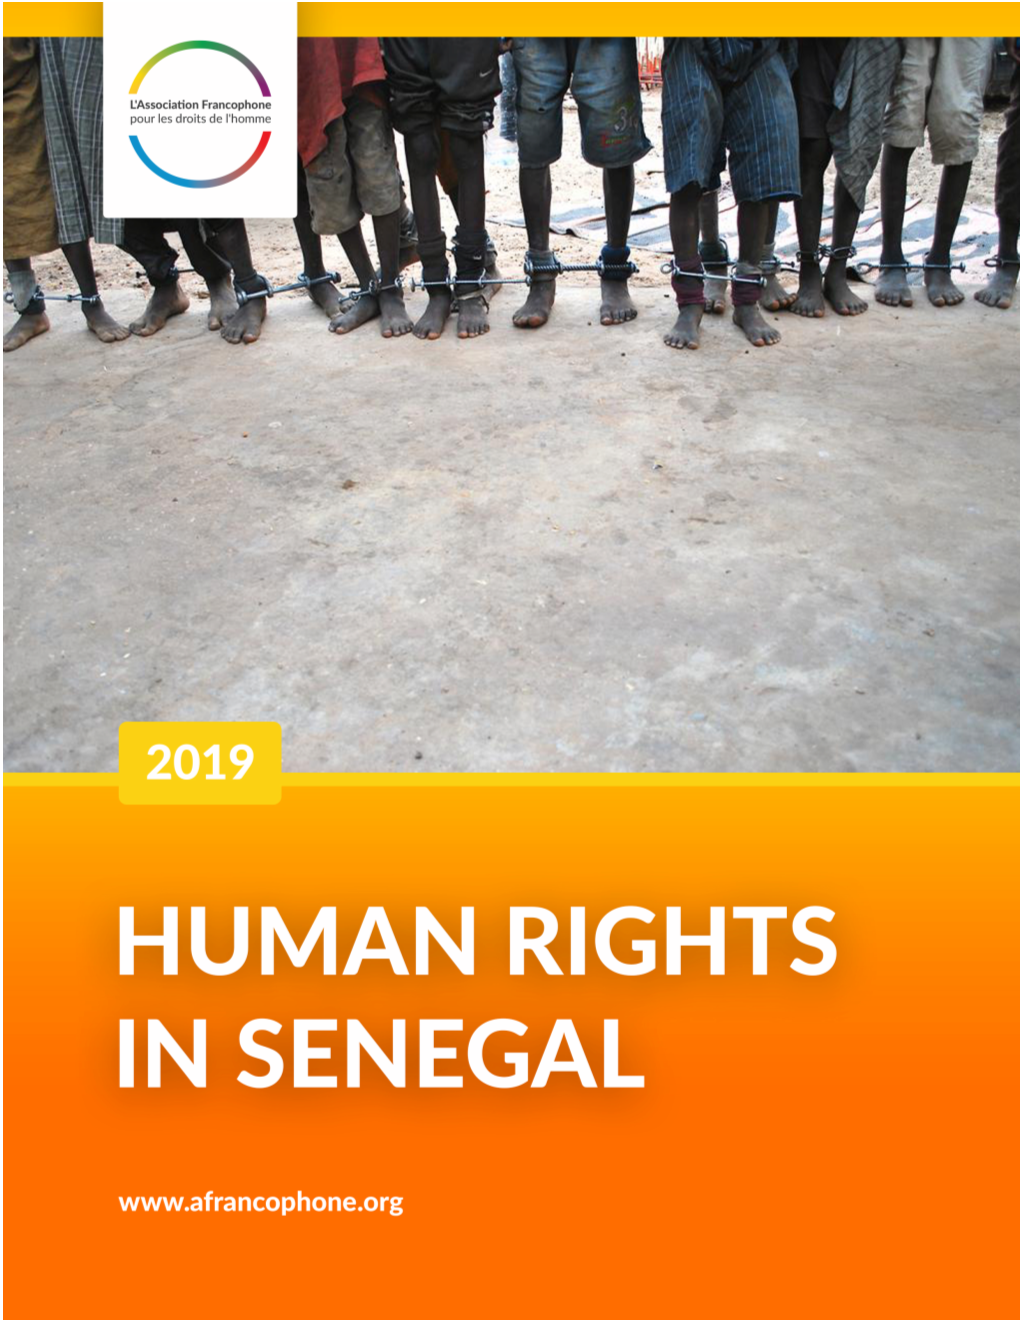 Human Rights in Senegal